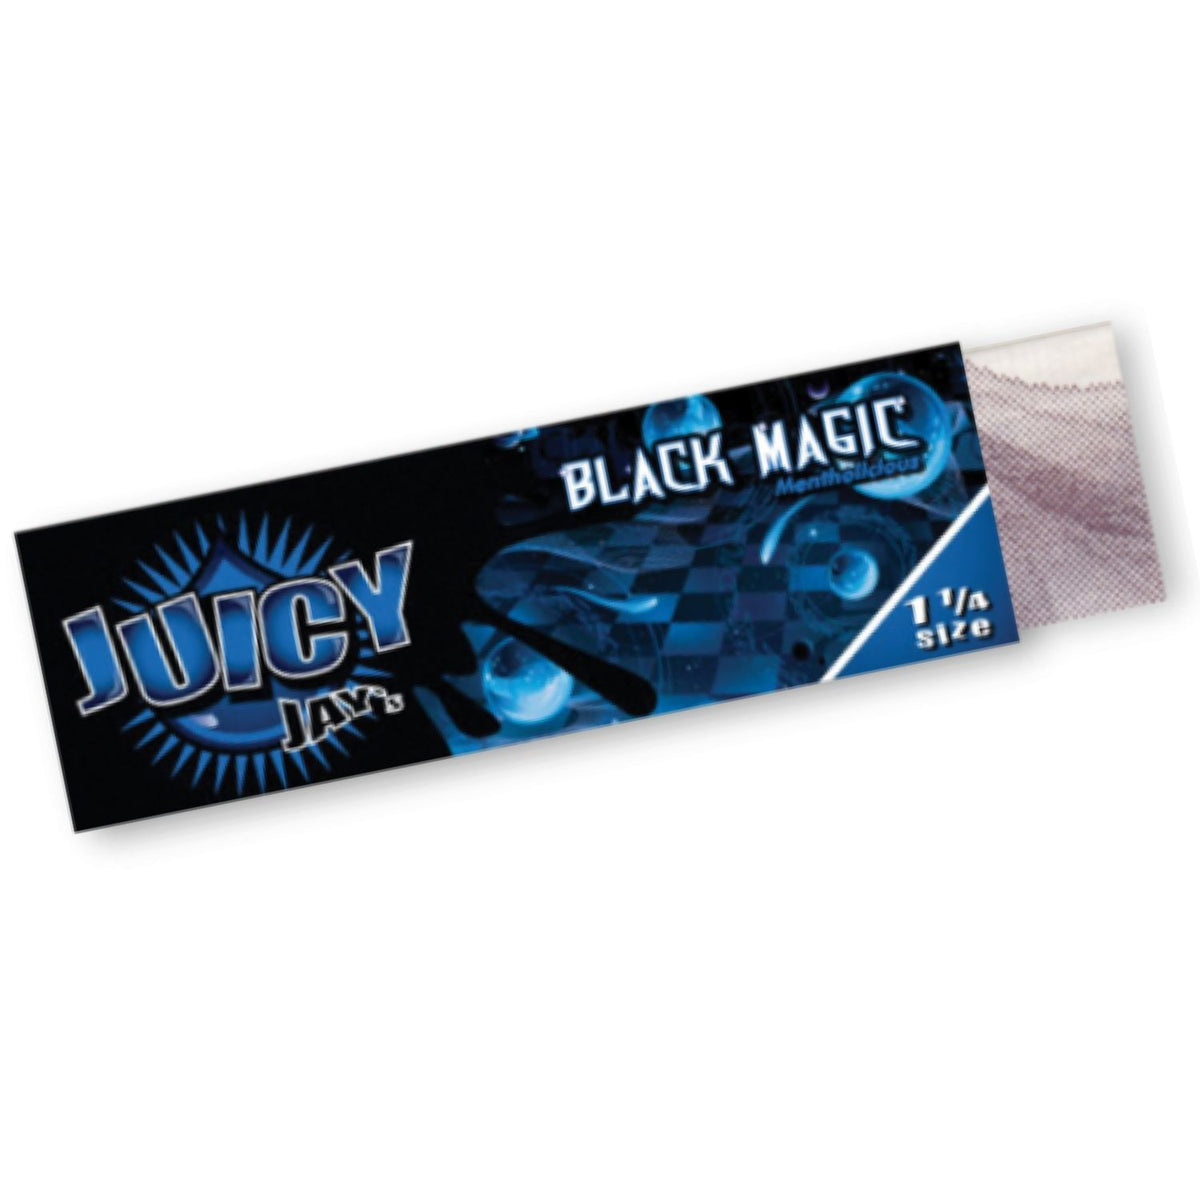 Juicy Jay Rolling Papers - Black Magic Flavor - 1 1/4 Size